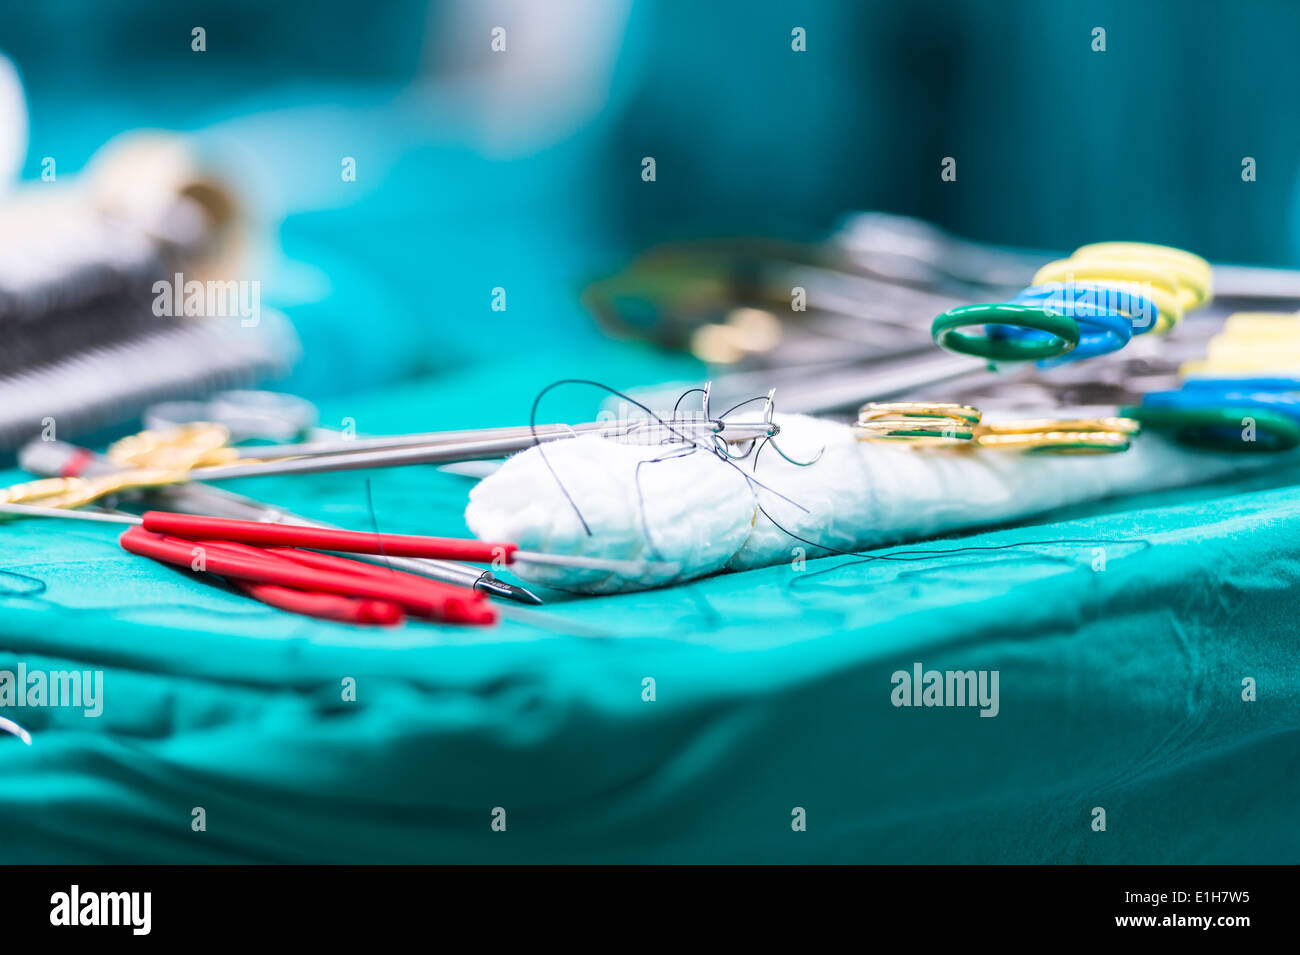 instruments for open heart surgery Stock Photo